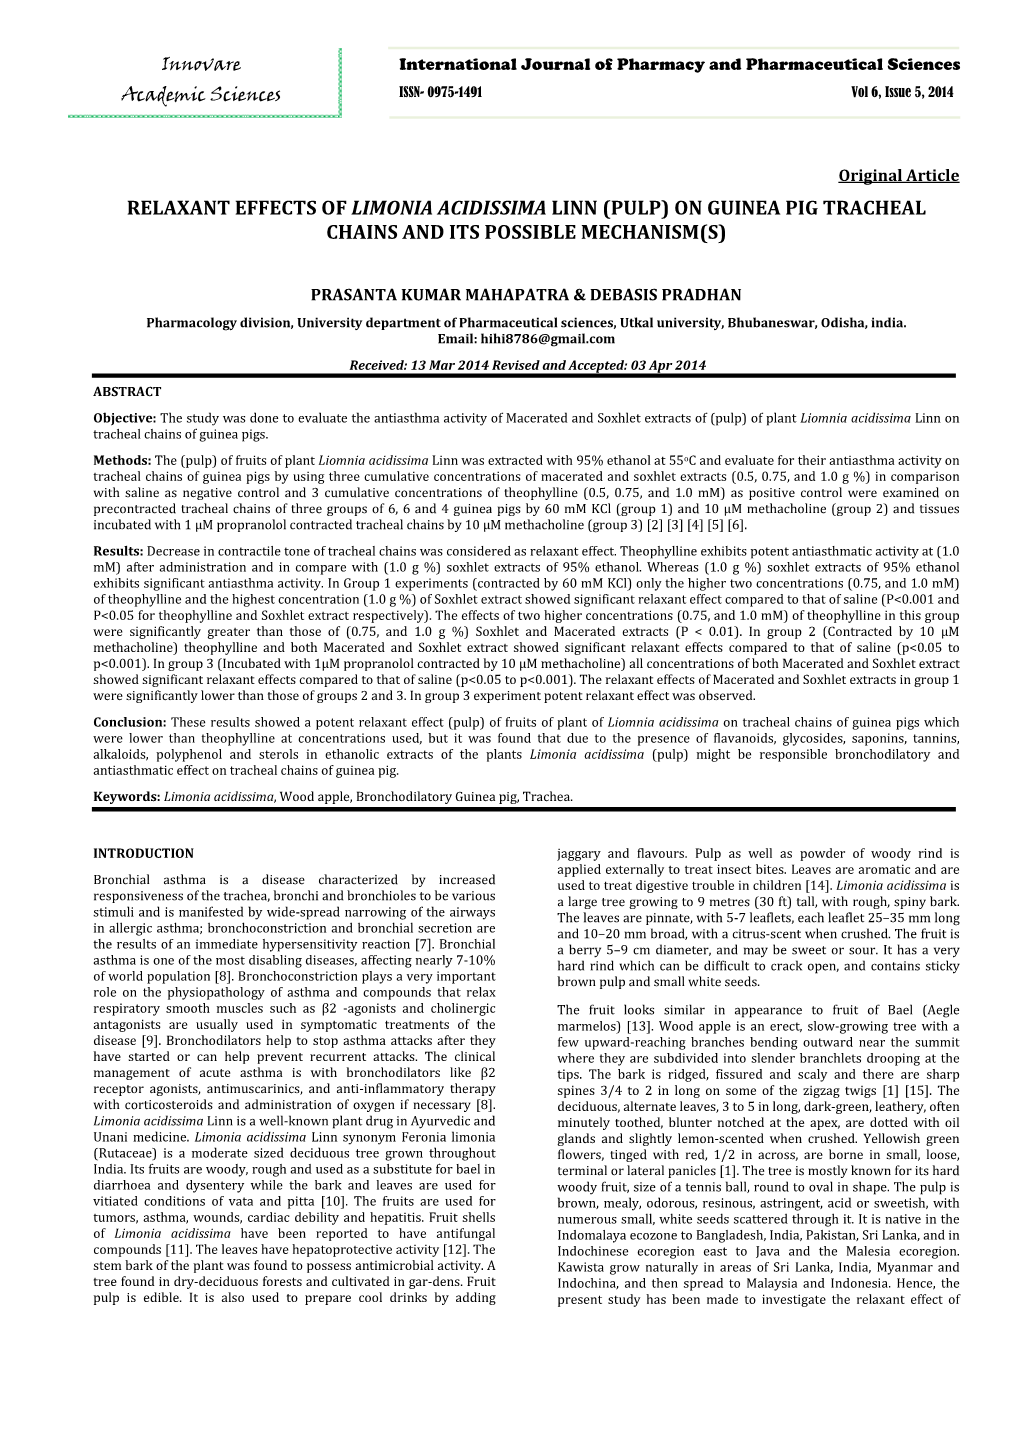 Relaxant Effects of Limonia Acidissima Linn (Pulp) on Guinea Pig Tracheal Chains and Its Possible Mechanism(S)